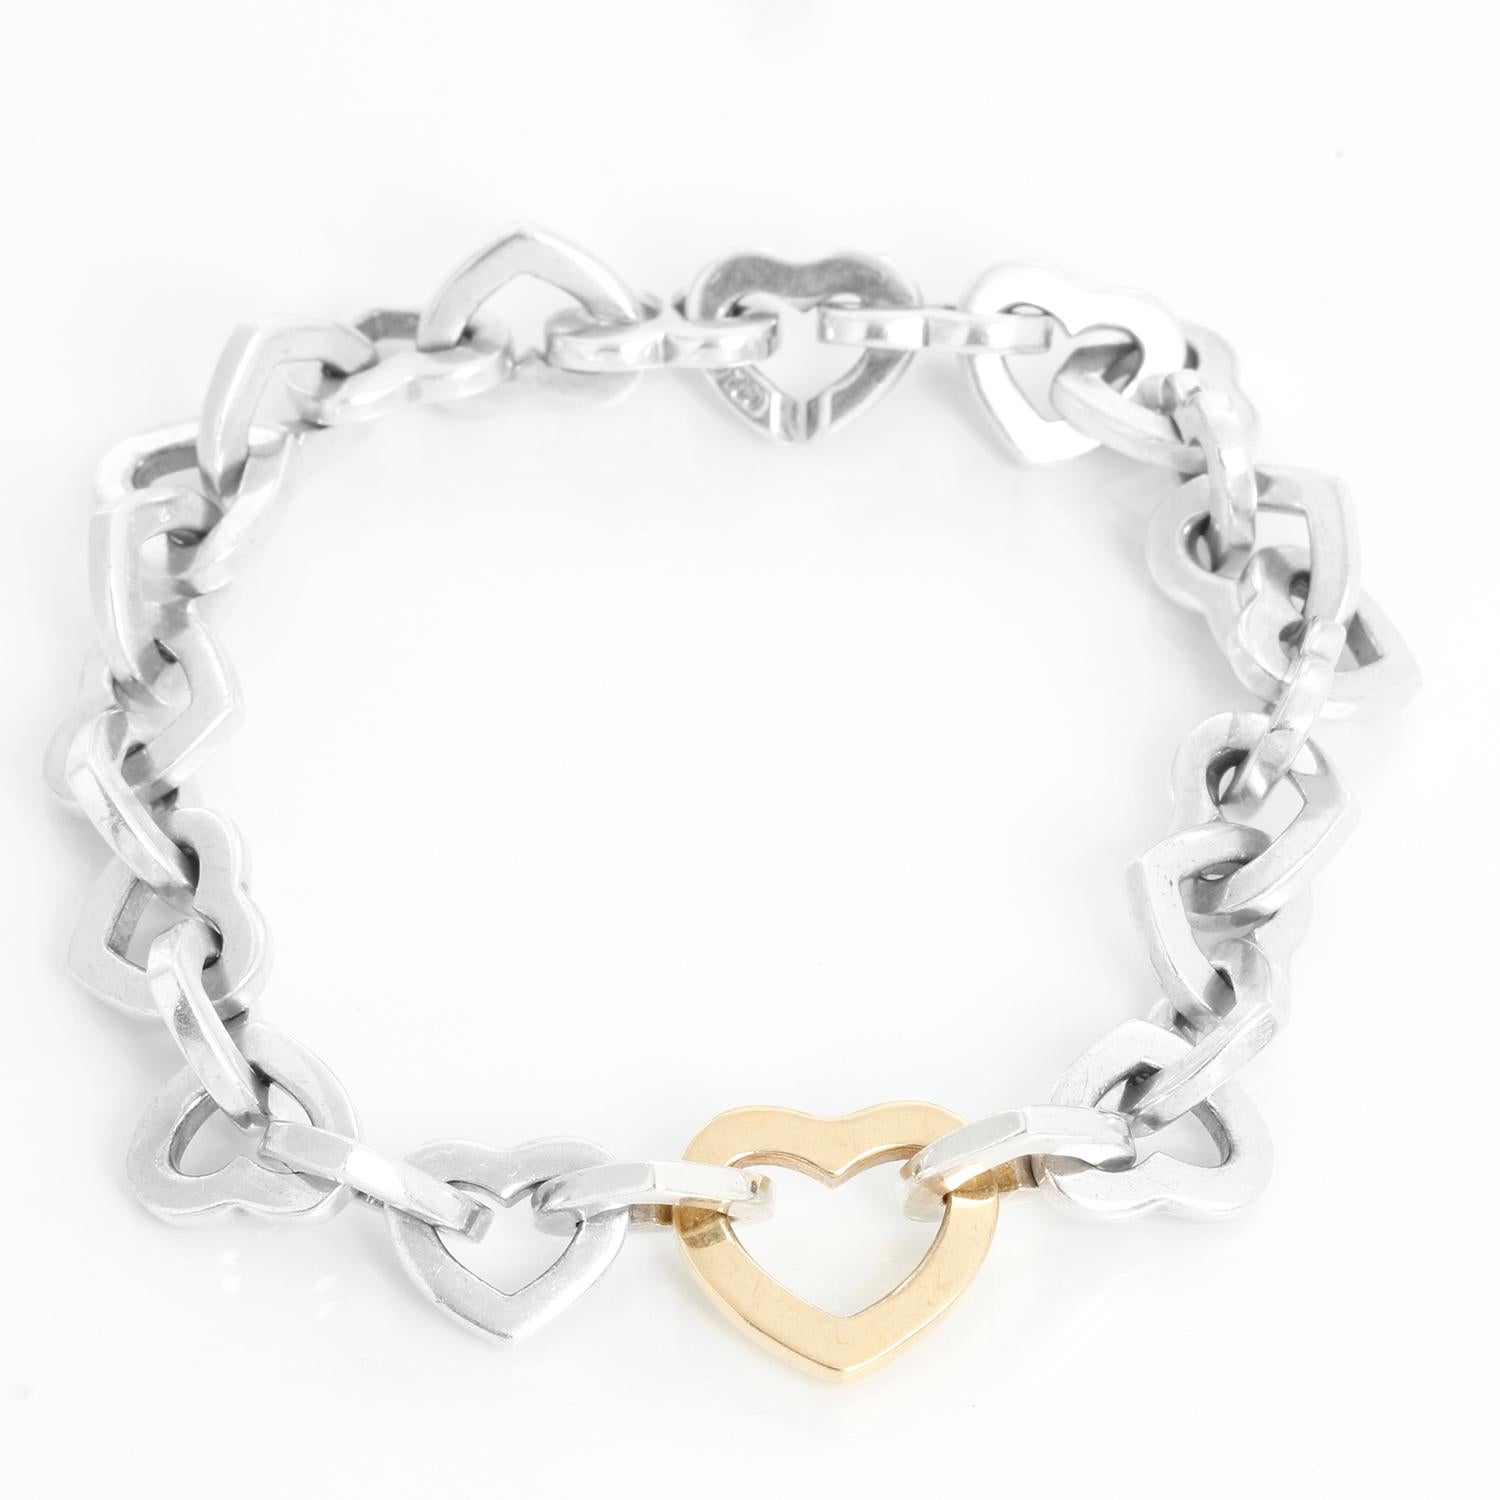 Vintage Tiffany & Co. Heart Link Bracelet  - Tiffany & Co Interlocking Hearts vintage bracelet. Sterling silver with 18k gold pendant (center heart). Measures 7 1/2  inches. Hallmarked, Pre-owned with Tiffany pouch and box.